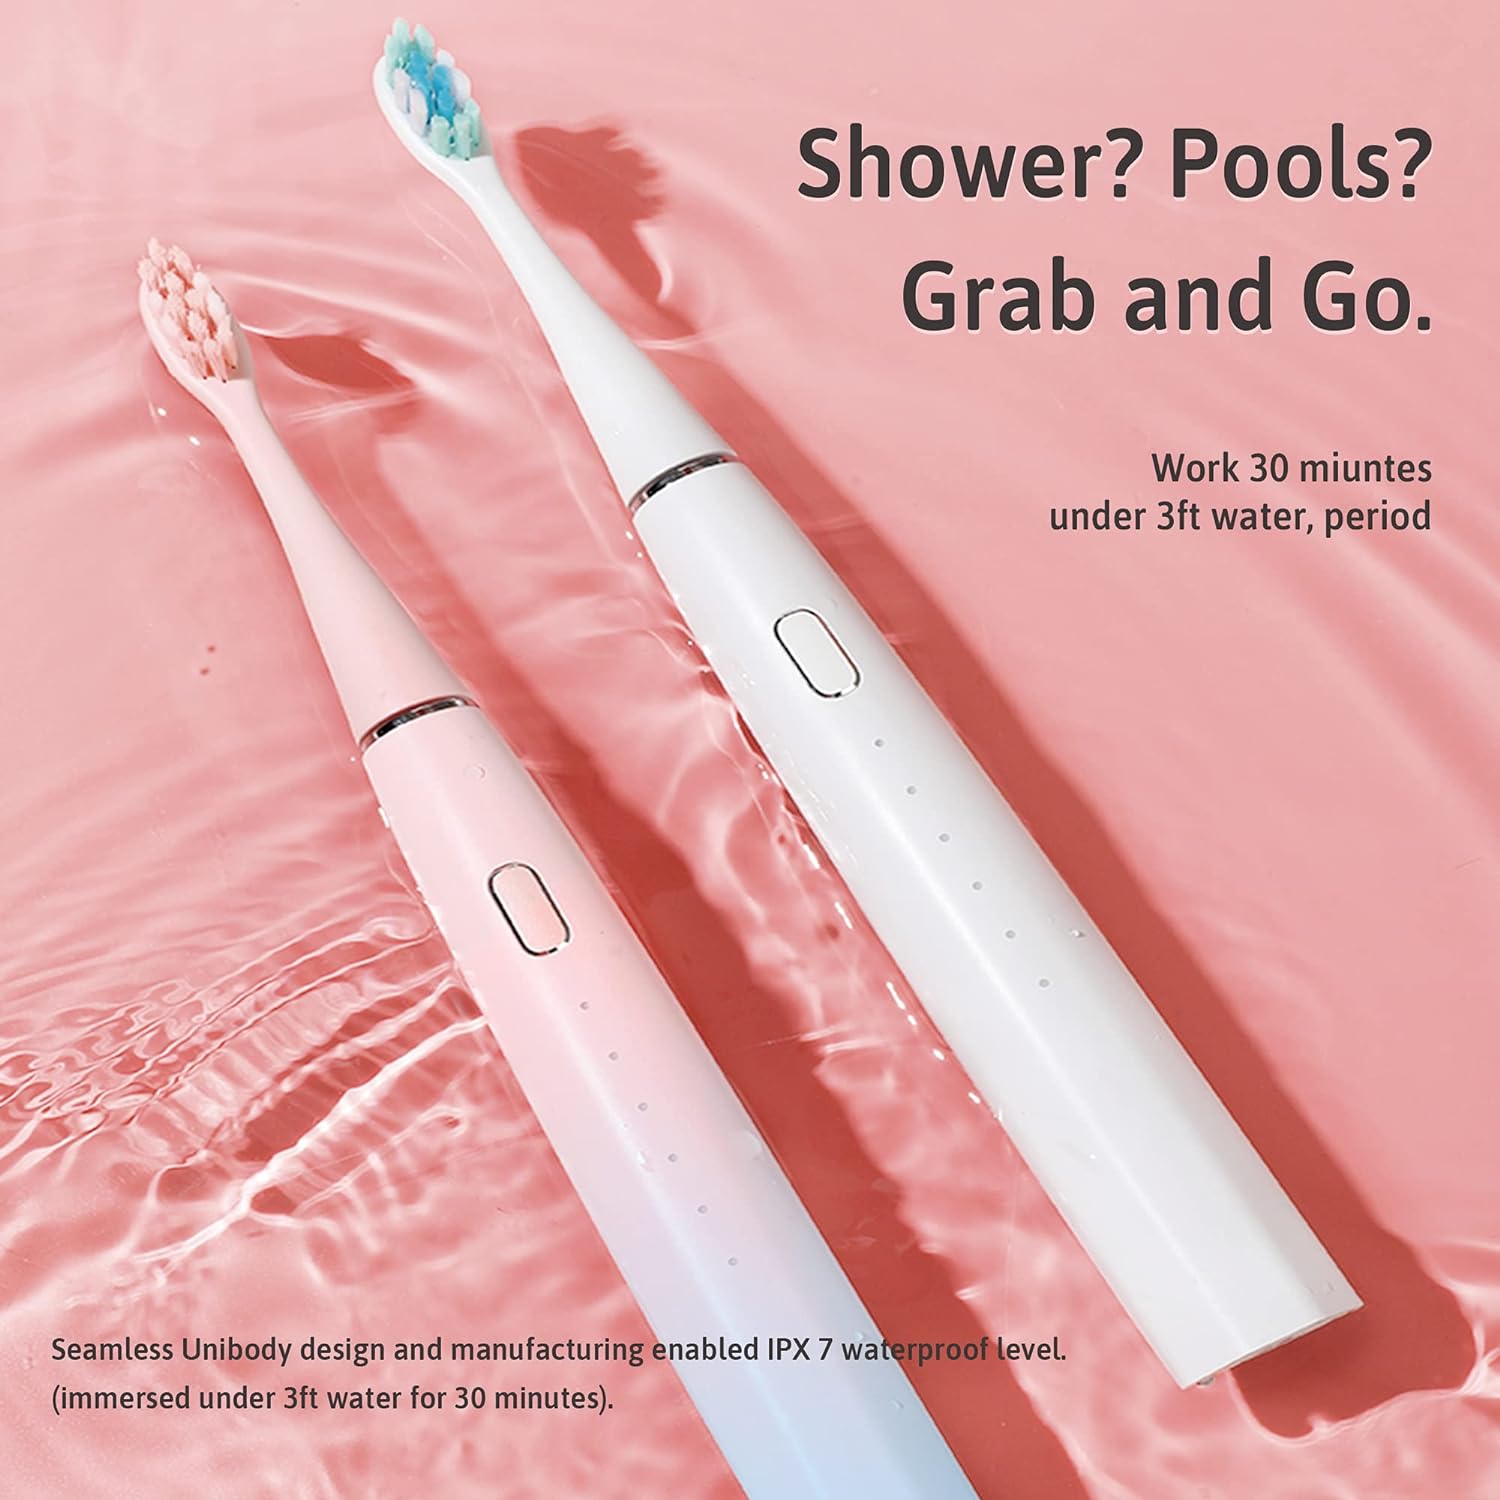 Oday N9000 Sonic Electric Toothbrush, 90% End-Rounding, 10 YR Warranty, 2,000 mAh Battery (180 Days), IPX7 Waterproof, 43,000 VPM (2nd Gen. 3S Sonic Motor), 5 Modes with Smart Timer, 6 Brush Heads